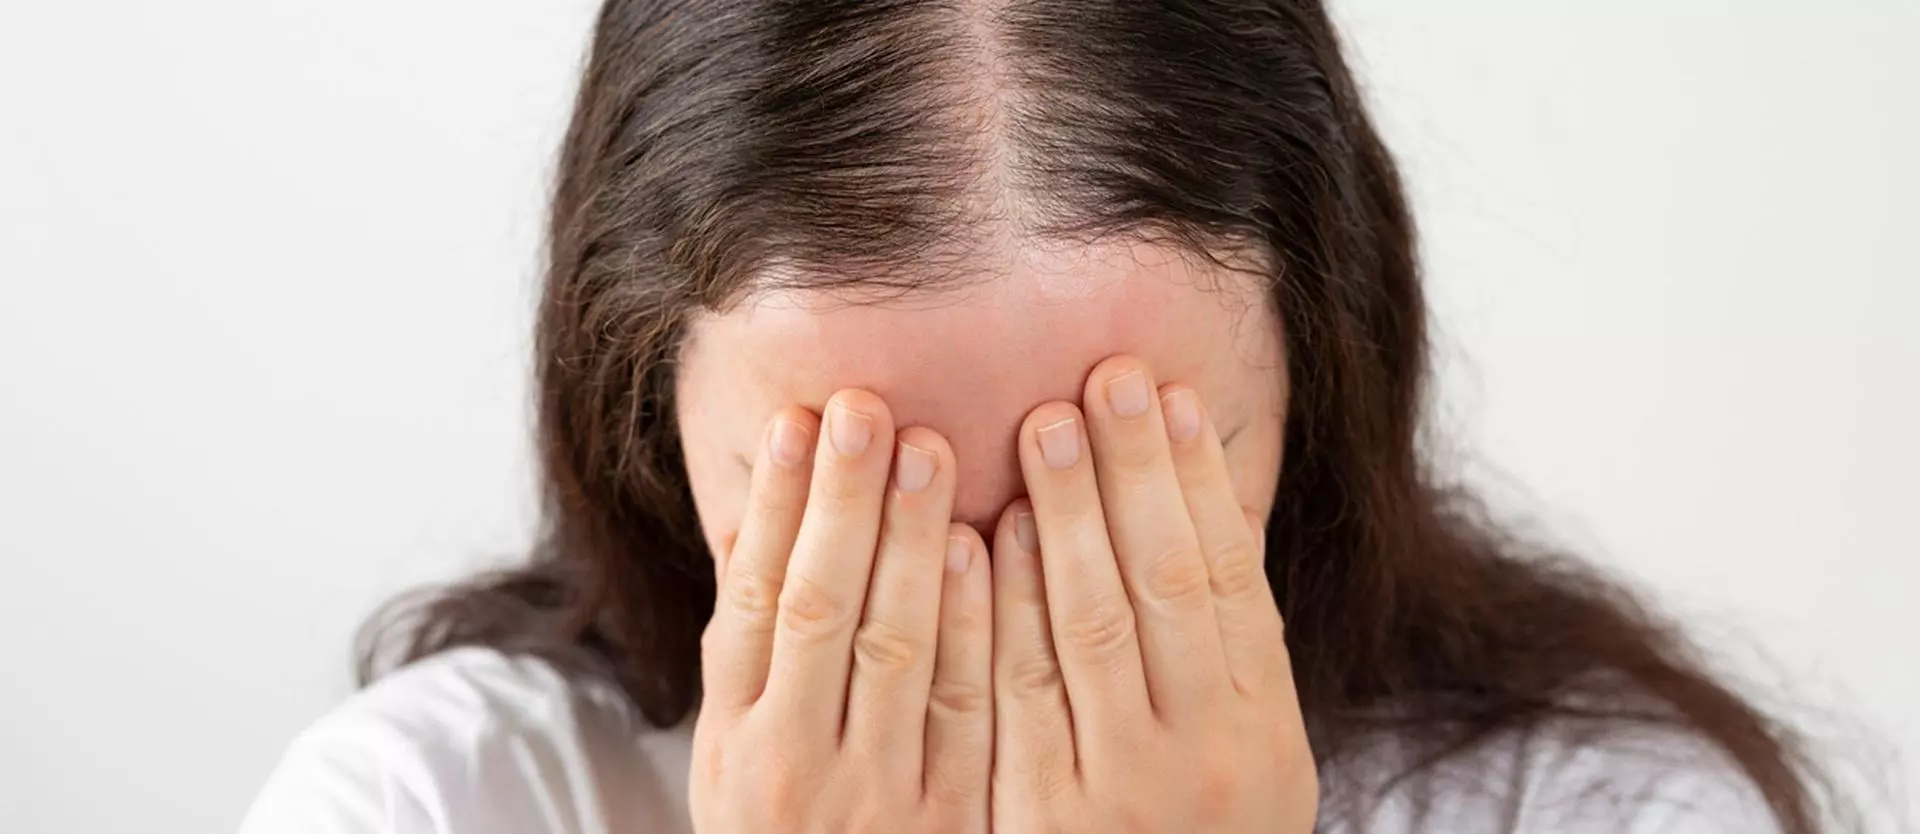 What Is Cicatricial (Scarring) Hair Loss?